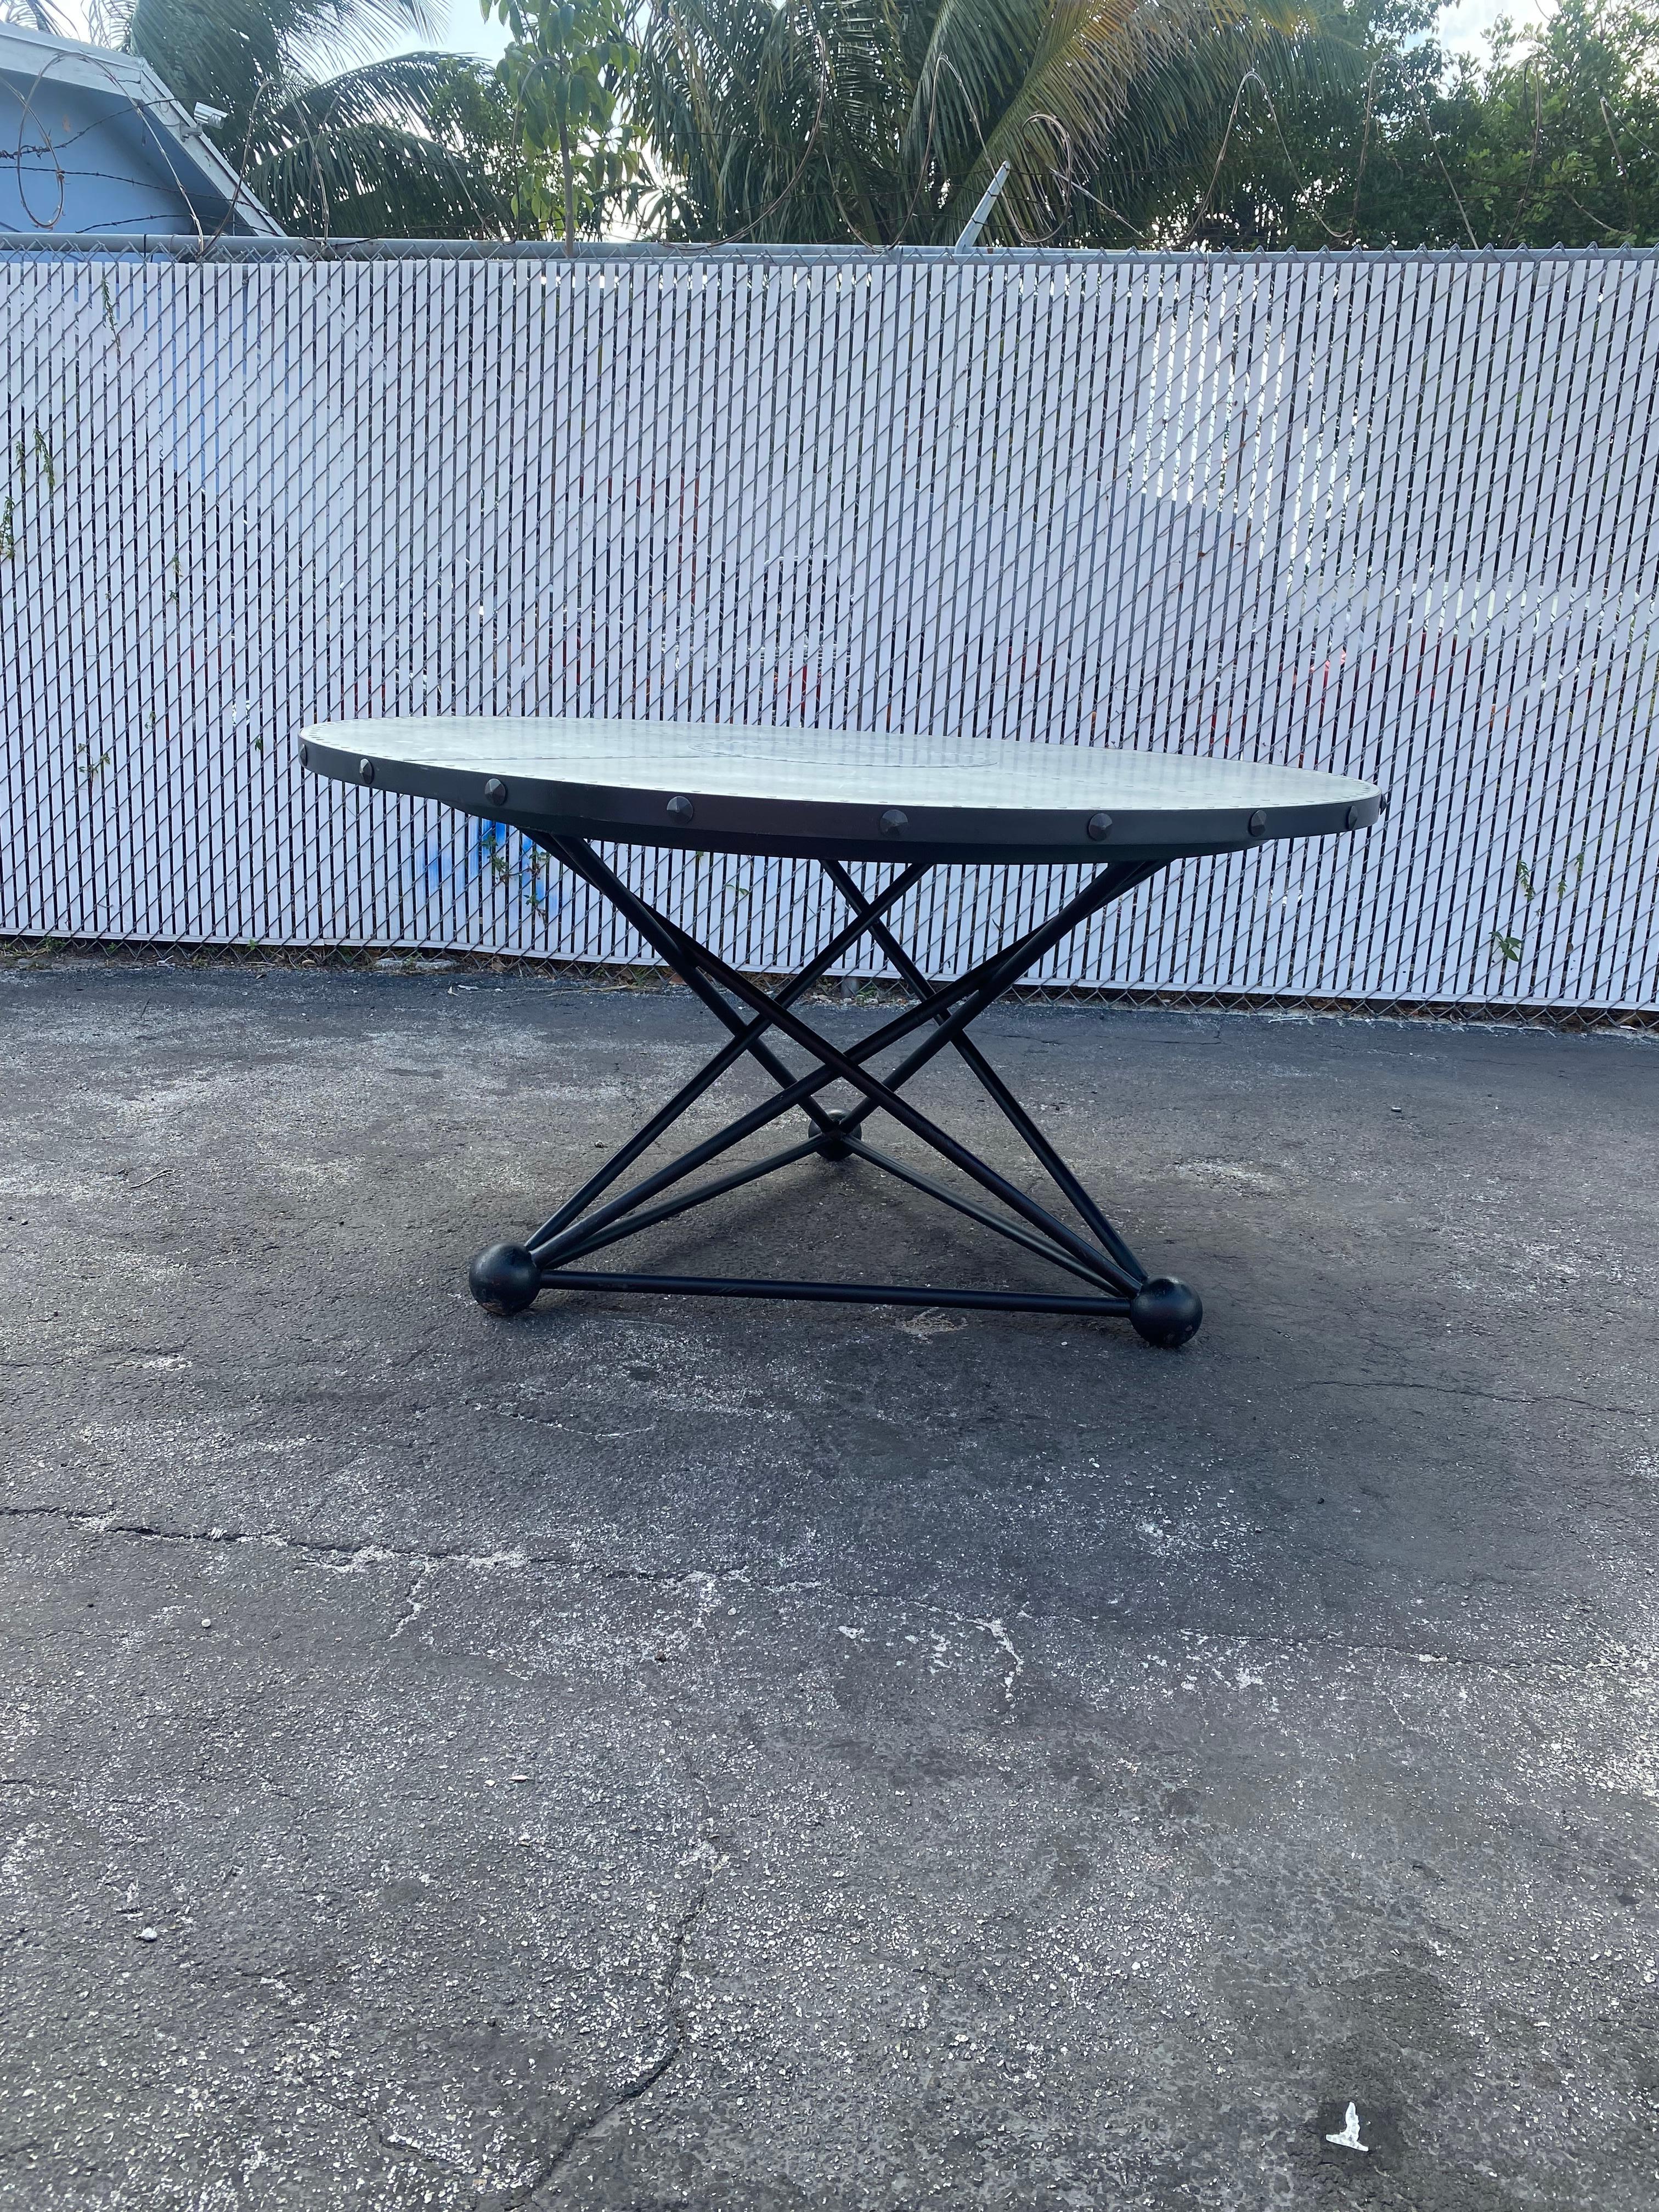 1980s Industrial Geometrical Sculptural Steel Zinc Wood Round Dining Table In Good Condition For Sale In Fort Lauderdale, FL